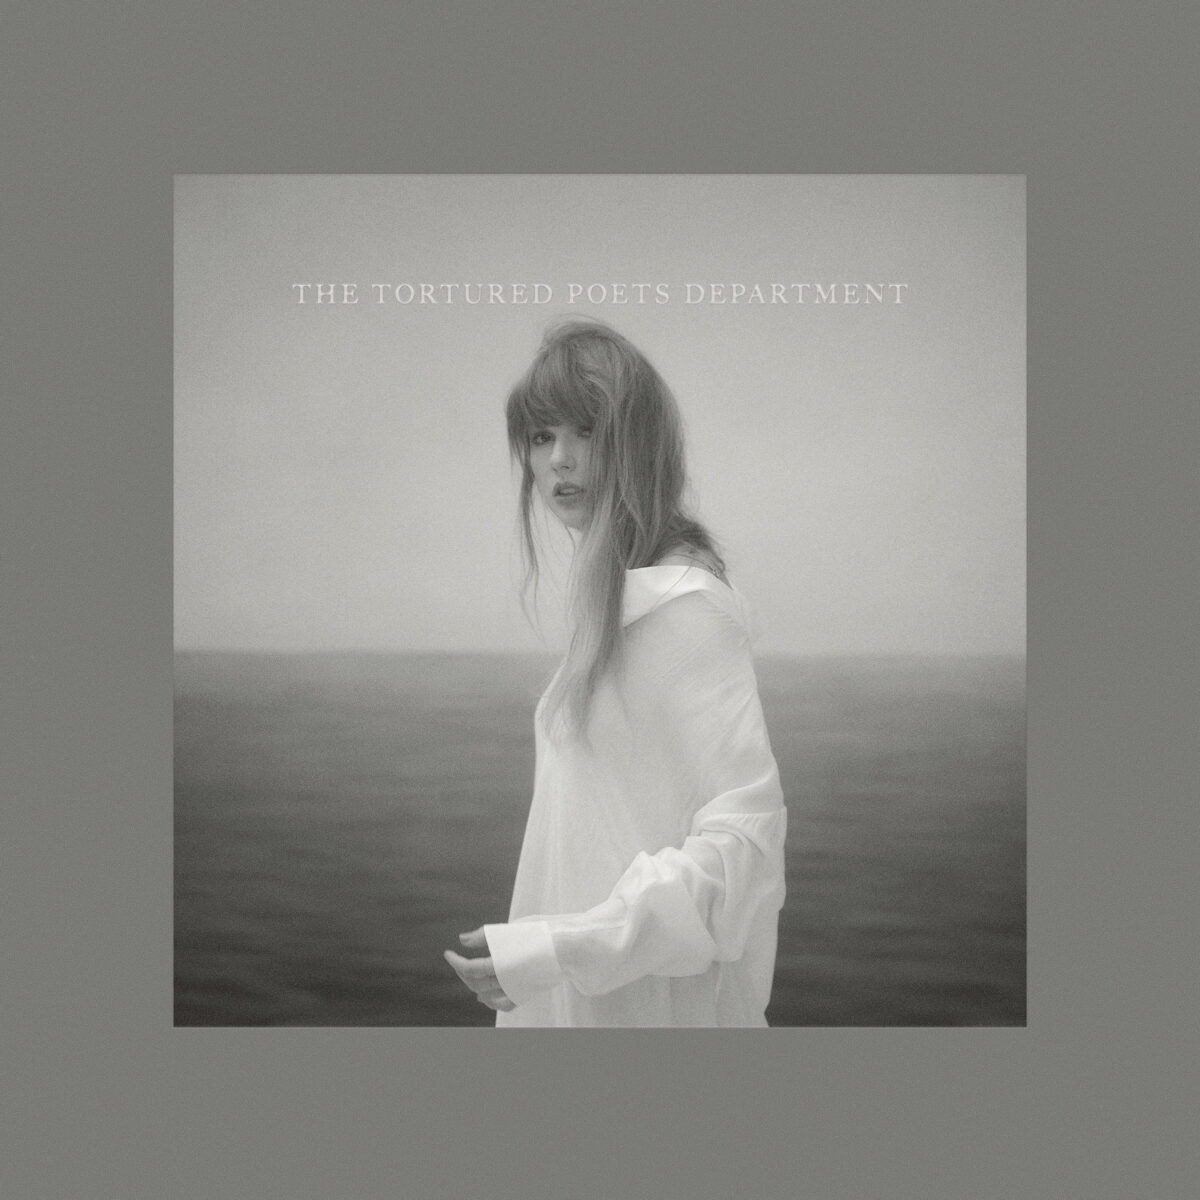 Taylor Swift's 'The Tortured Poets Department' is great sad pop, meditative theater